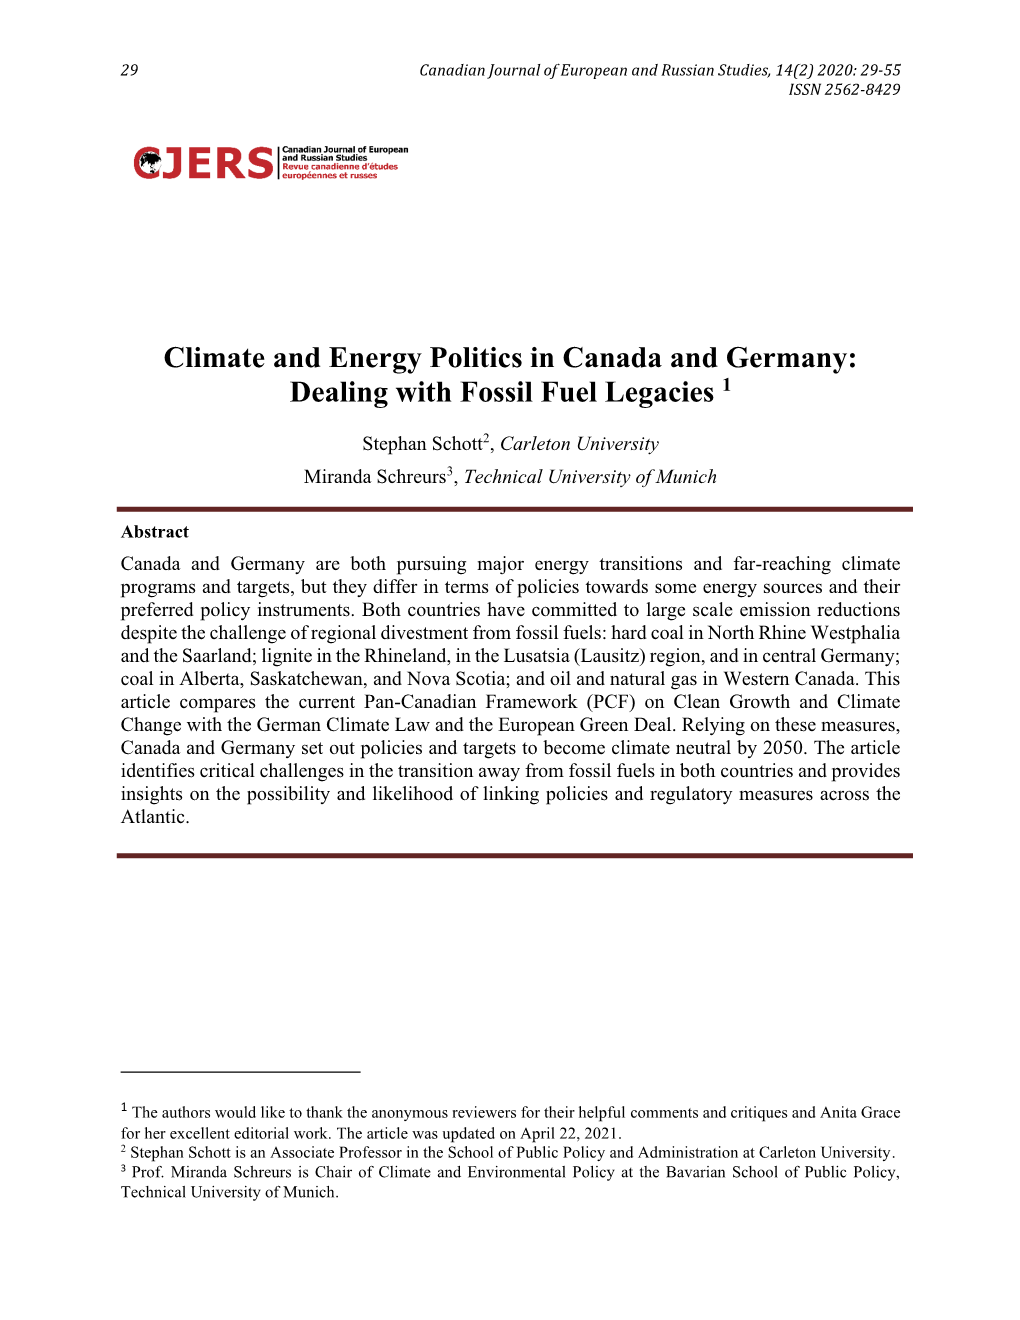 Climate and Energy Politics in Canada and Germany: Dealing with Fossil Fuel Legacies 1